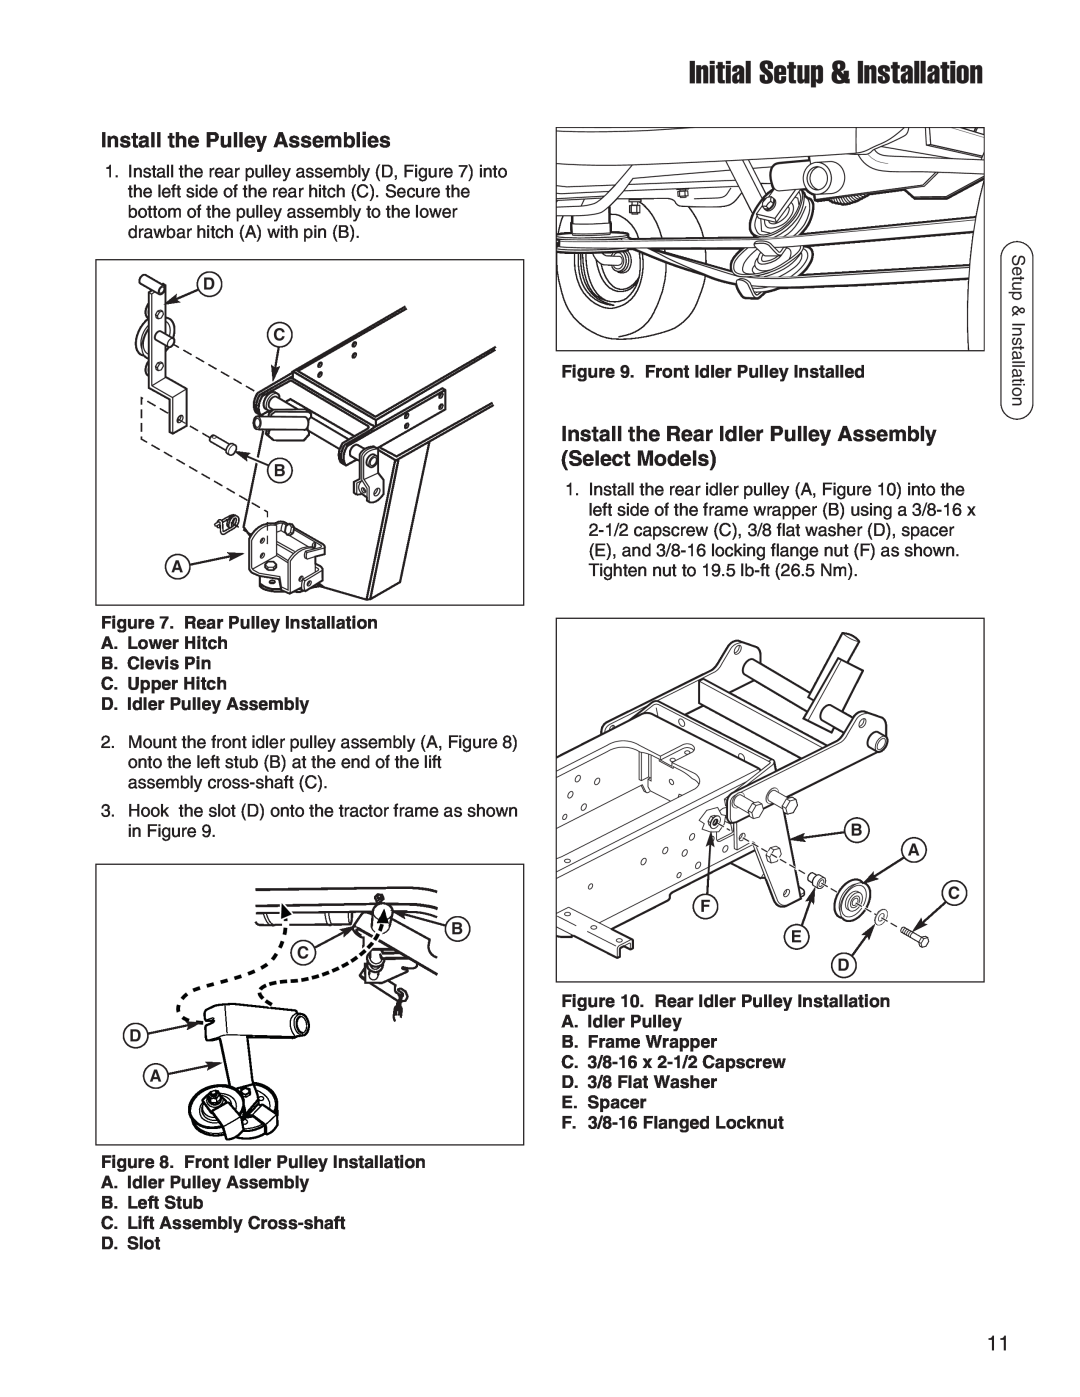 Snapper 1694151, 1695419 manual Install the Pulley Assemblies, Initial Setup & Installation 